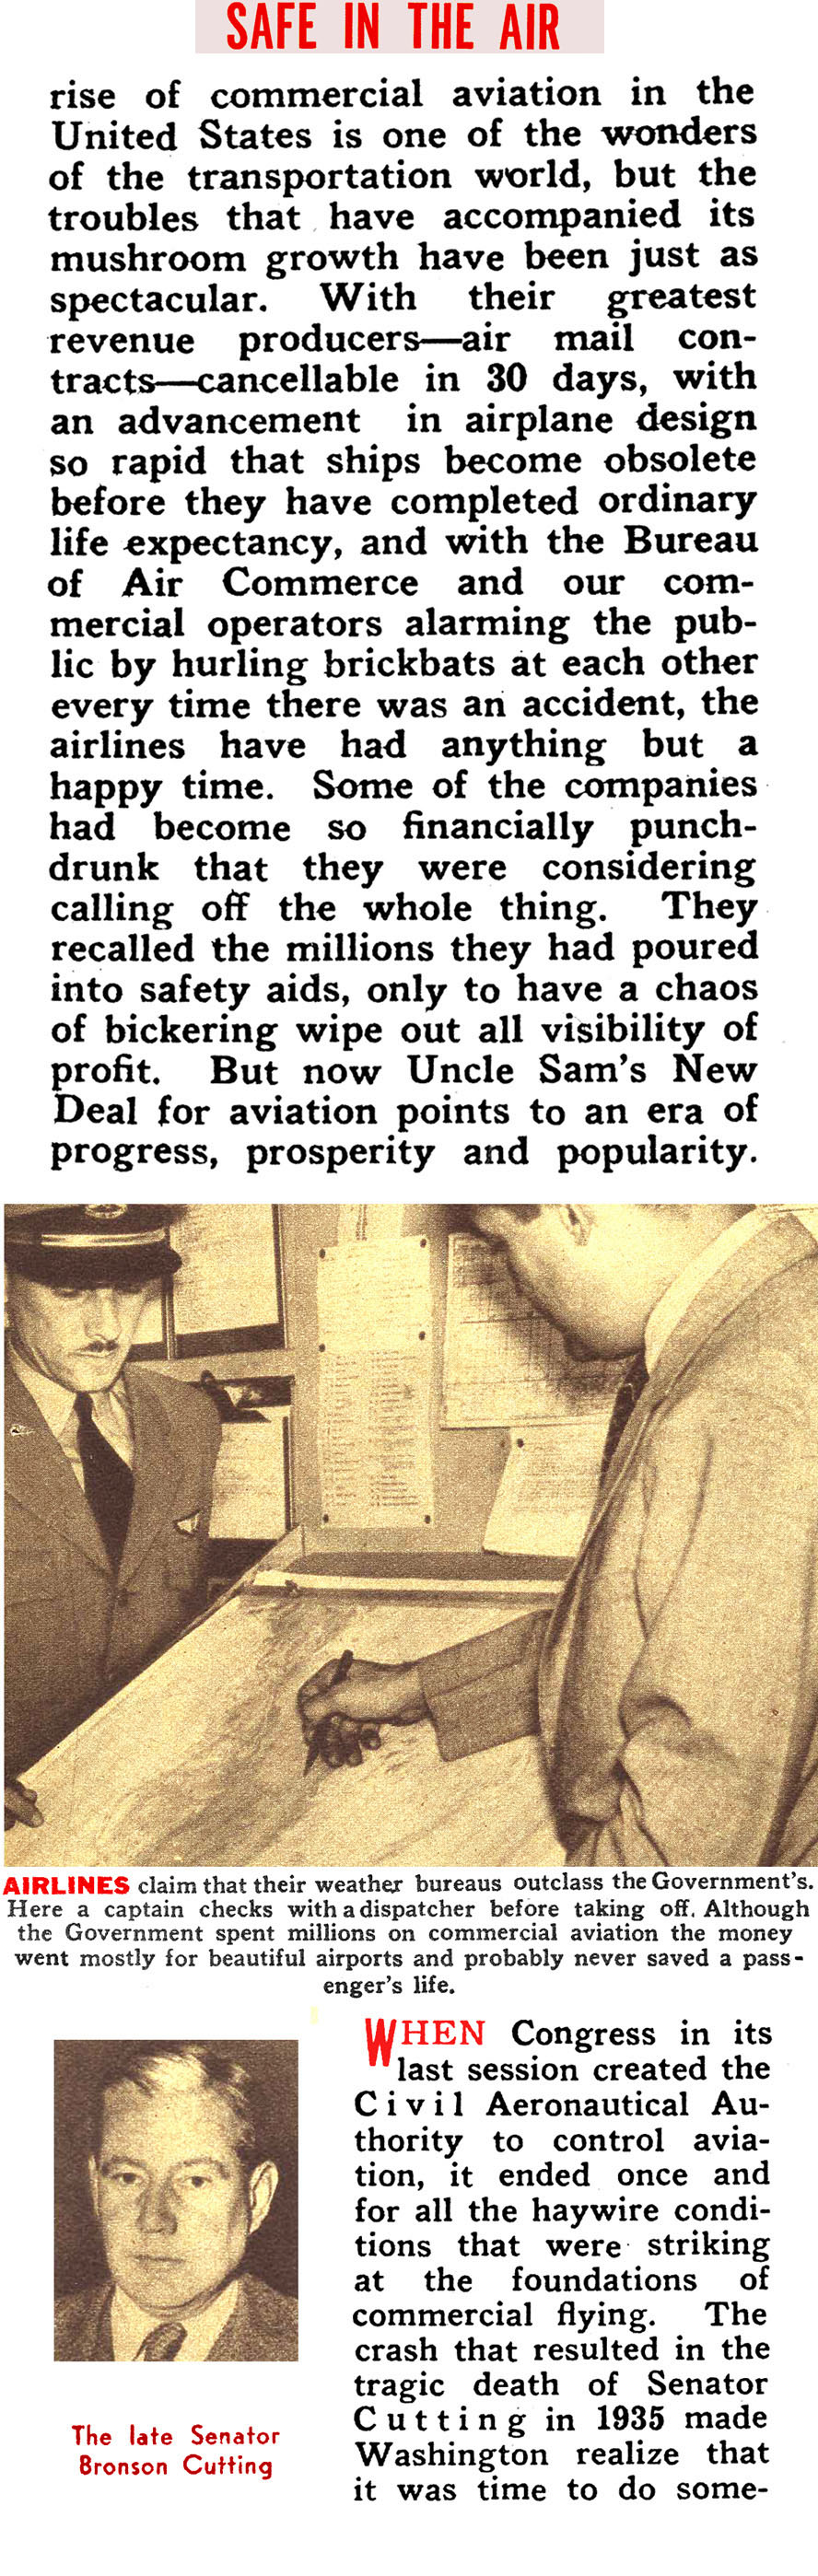 The First Ten Years of Passenger Air Travel (Click Magazine, 1938)